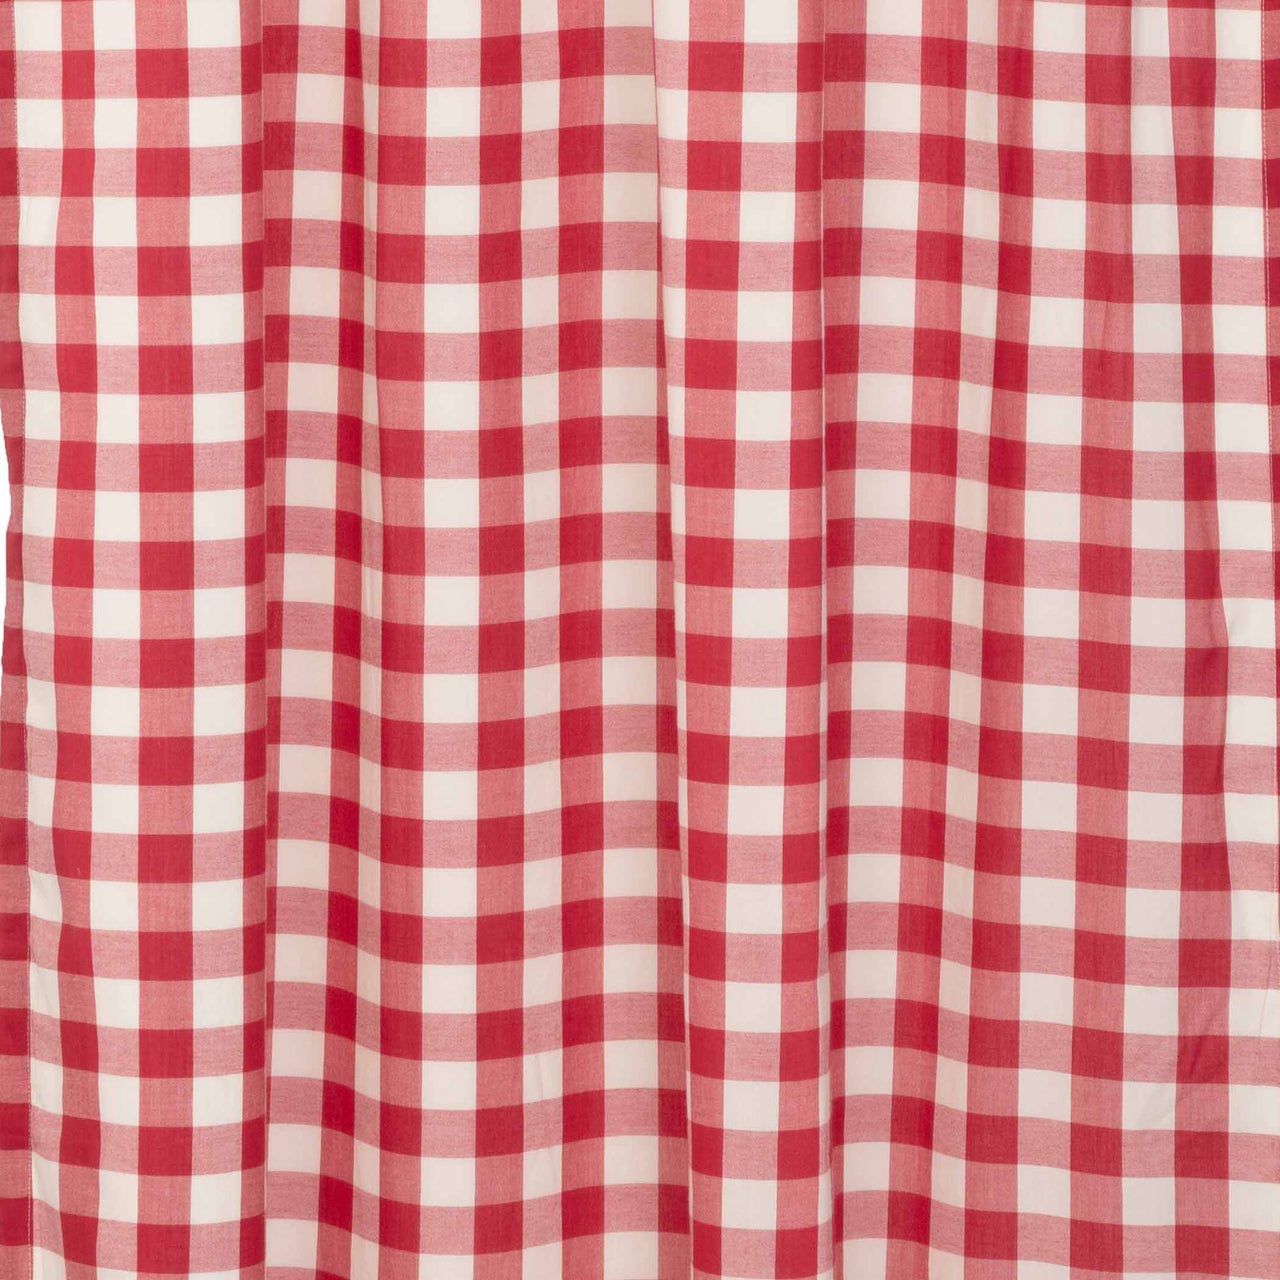 Annie Buffalo Red Check Short Panel Curtain Set of 2 63"x36" VHC Brands